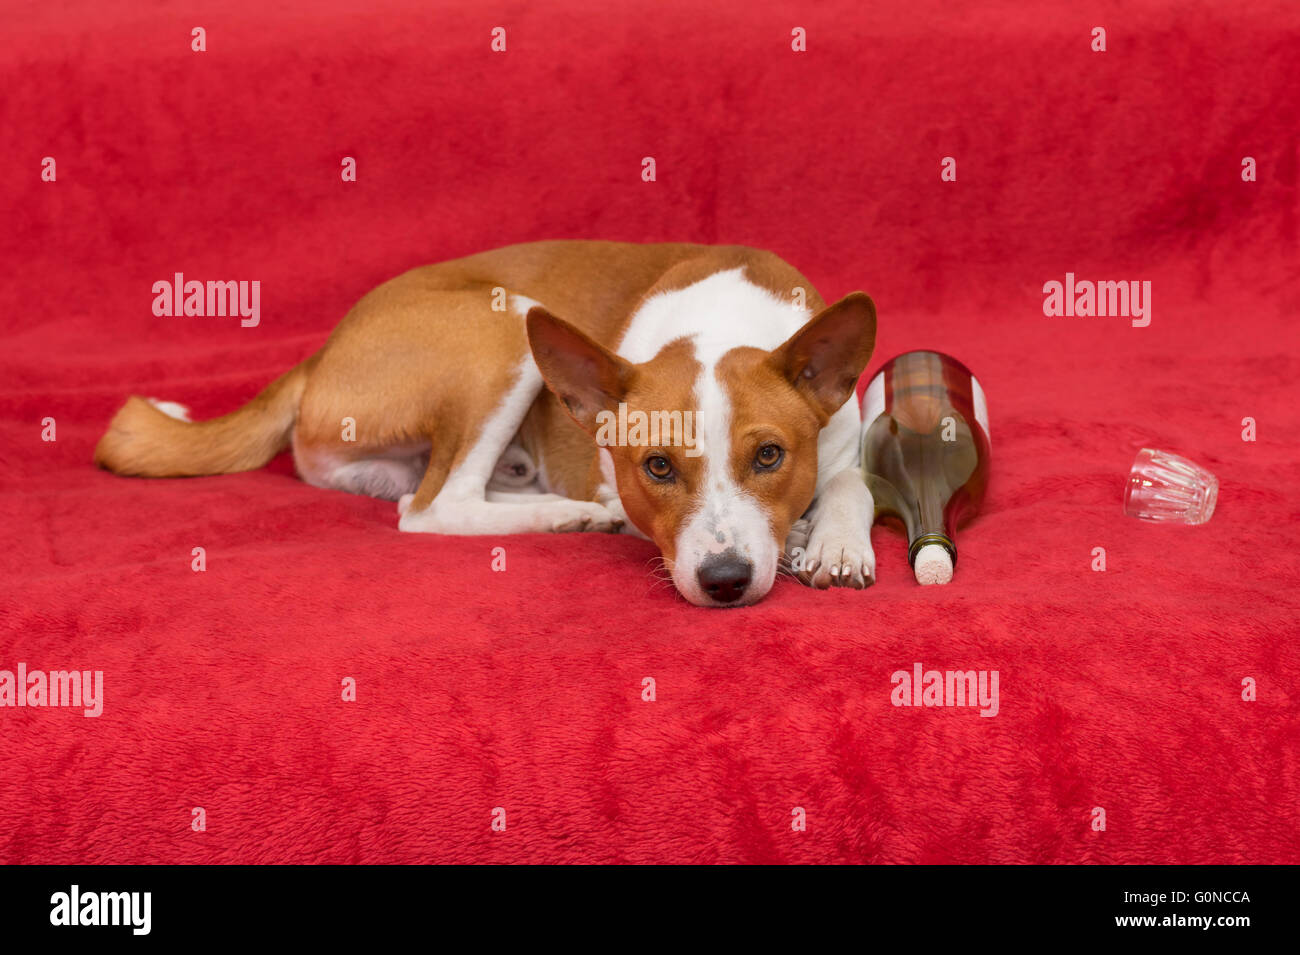 Cute basenji having rest on red sofa next to empty wine bottle and glass Stock Photo